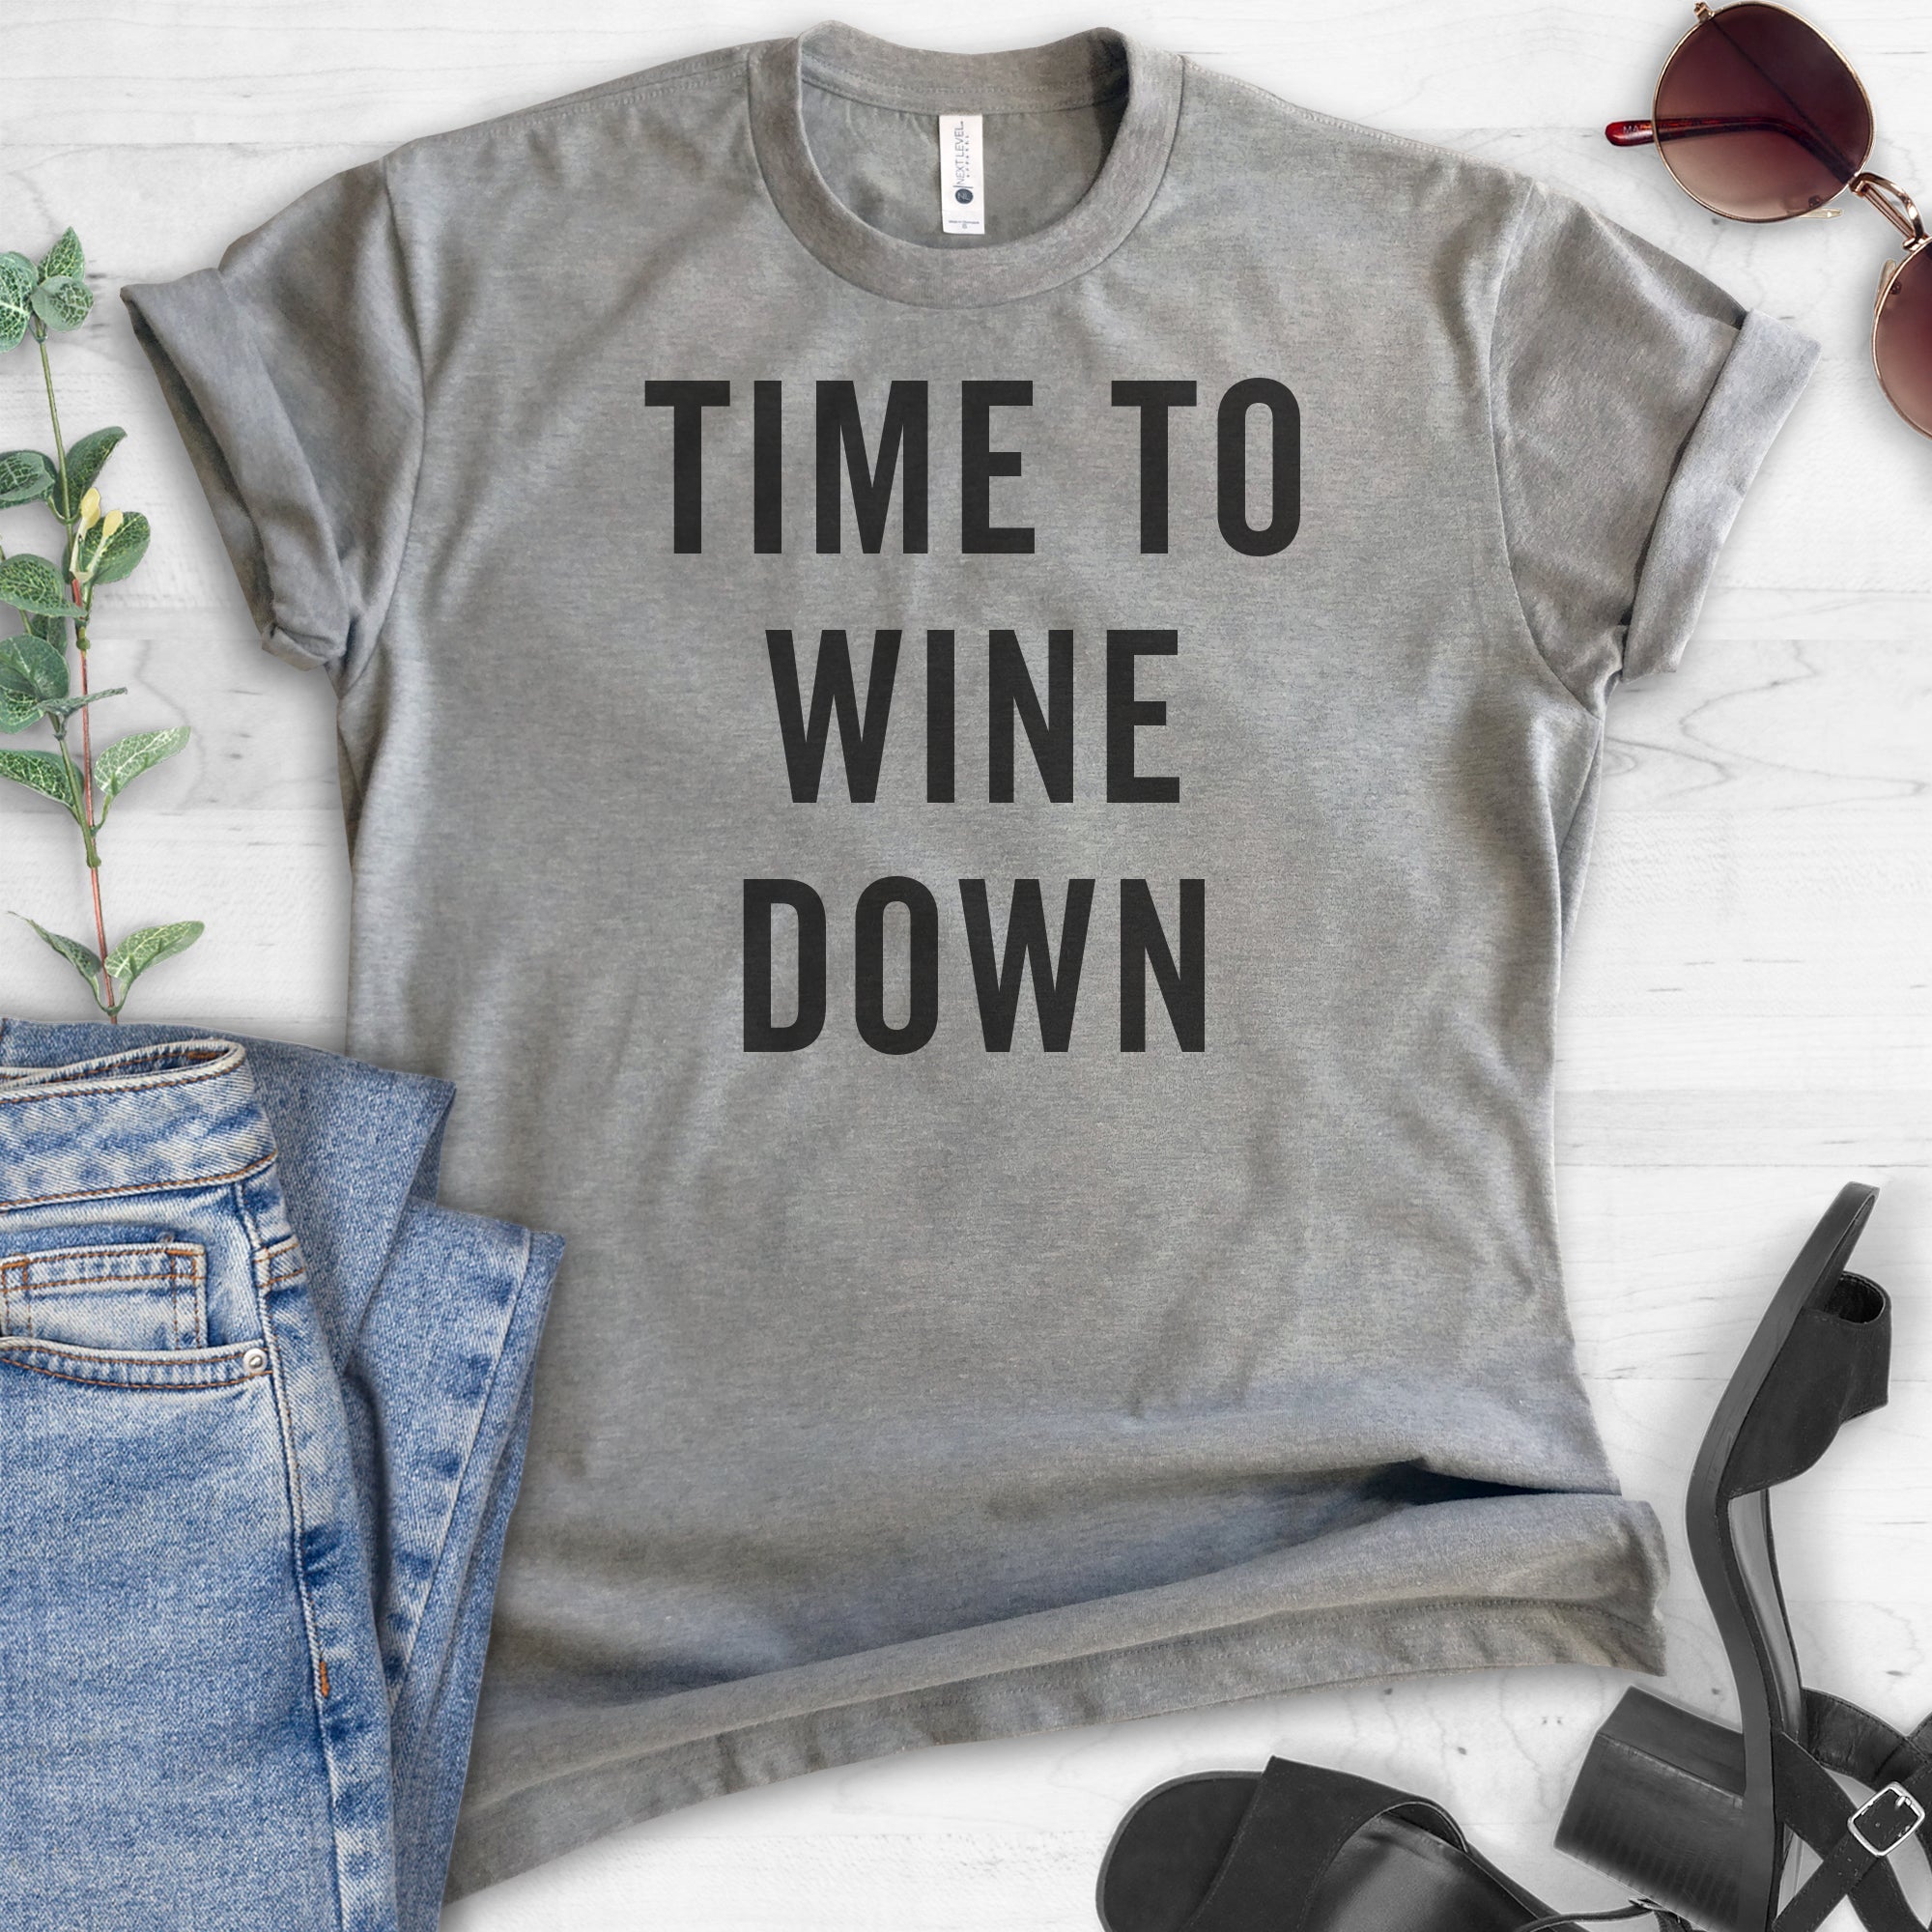 Time To Wine Down T-shirt